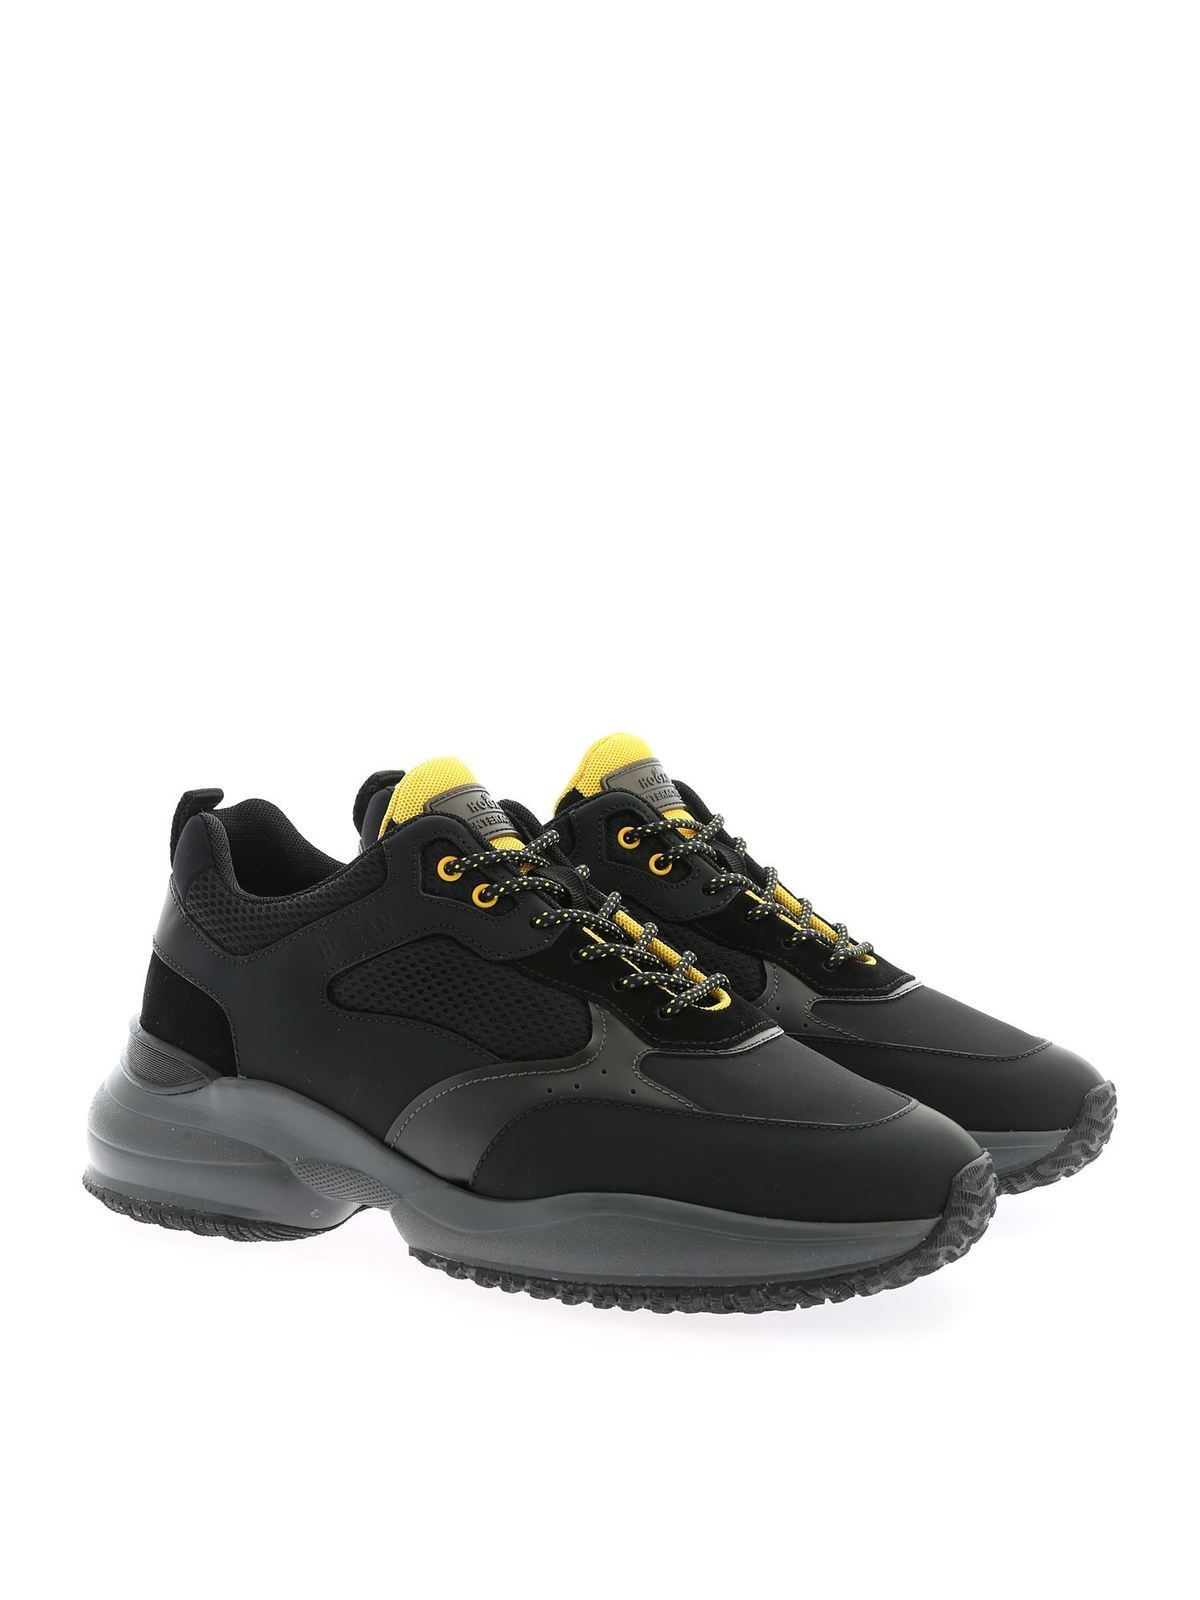 black and yellow trainers